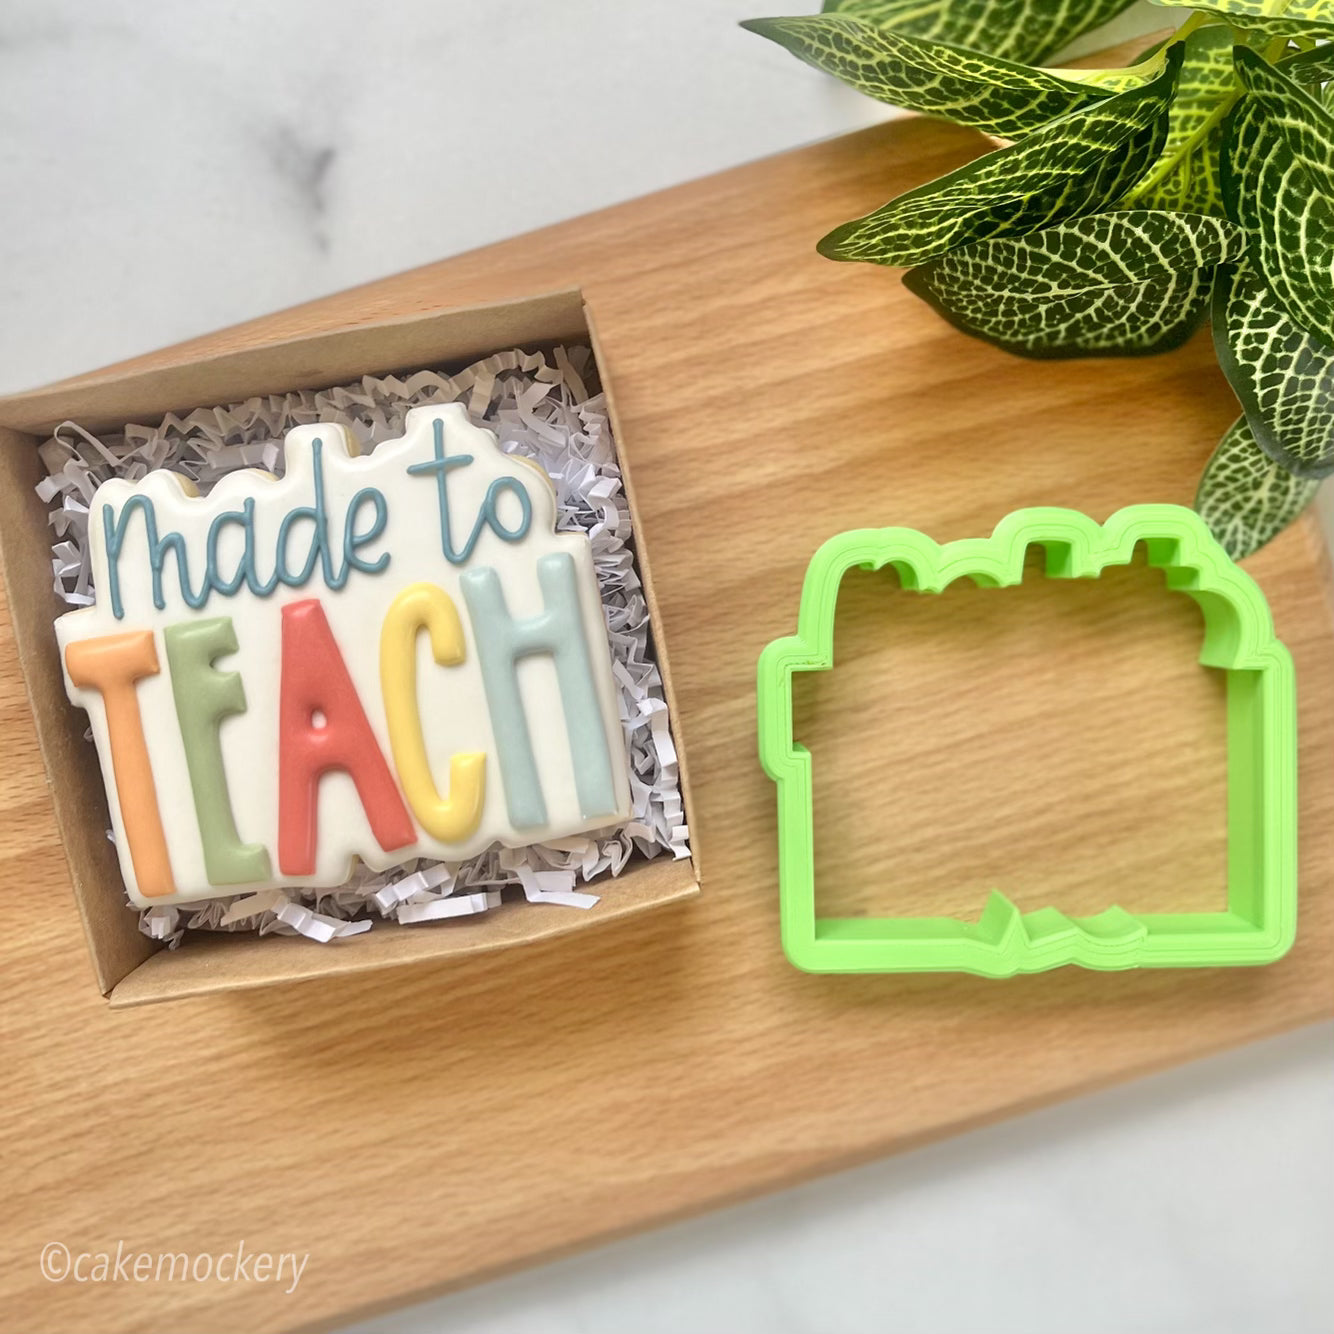 Made to Teach Cookie Cutter